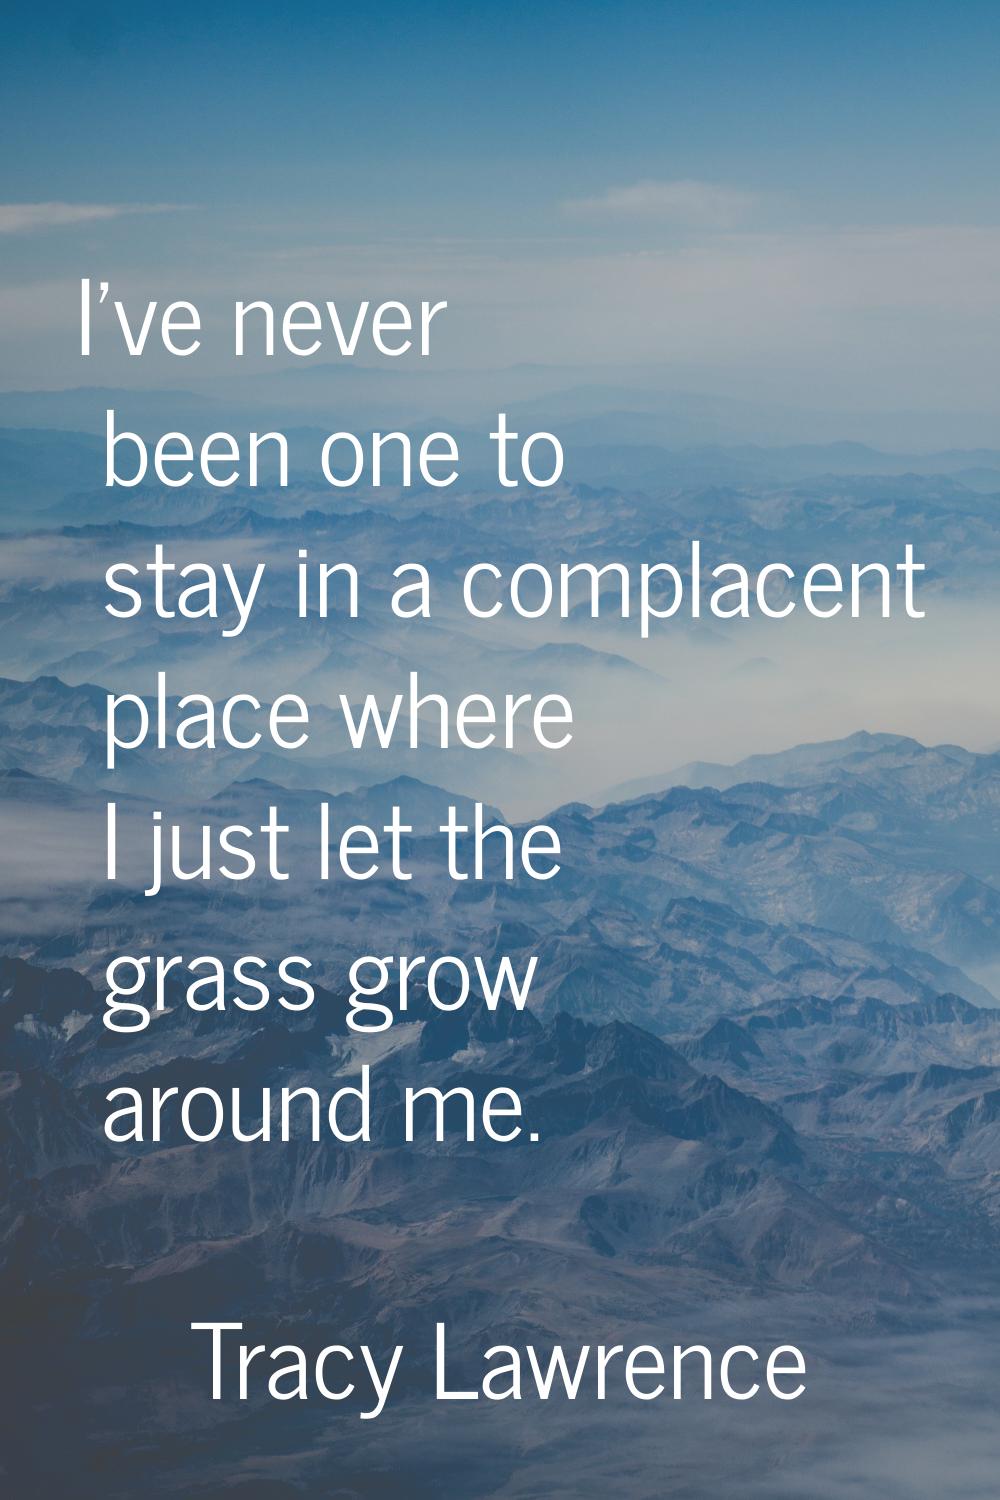 I've never been one to stay in a complacent place where I just let the grass grow around me.